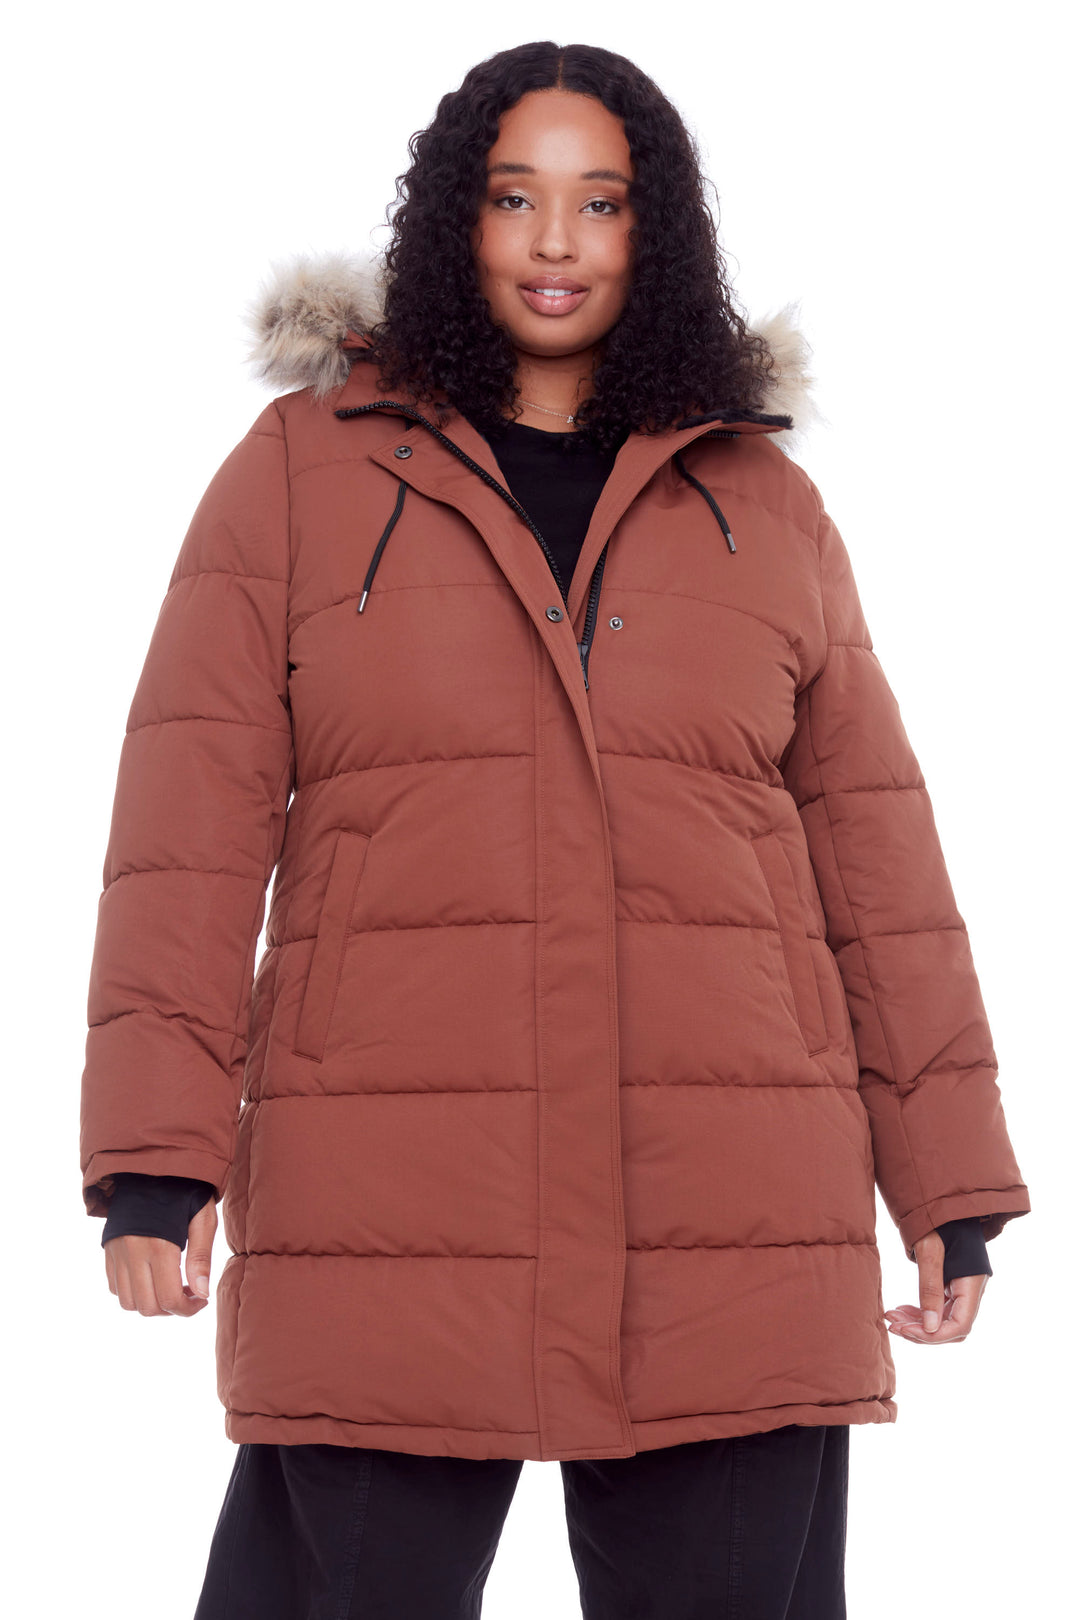 AULAVIK PLUS | WOMEN'S VEGAN DOWN (RECYCLED) MID-LENGTH HOODED PARKA COAT, MAPLE (PLUS SIZE)